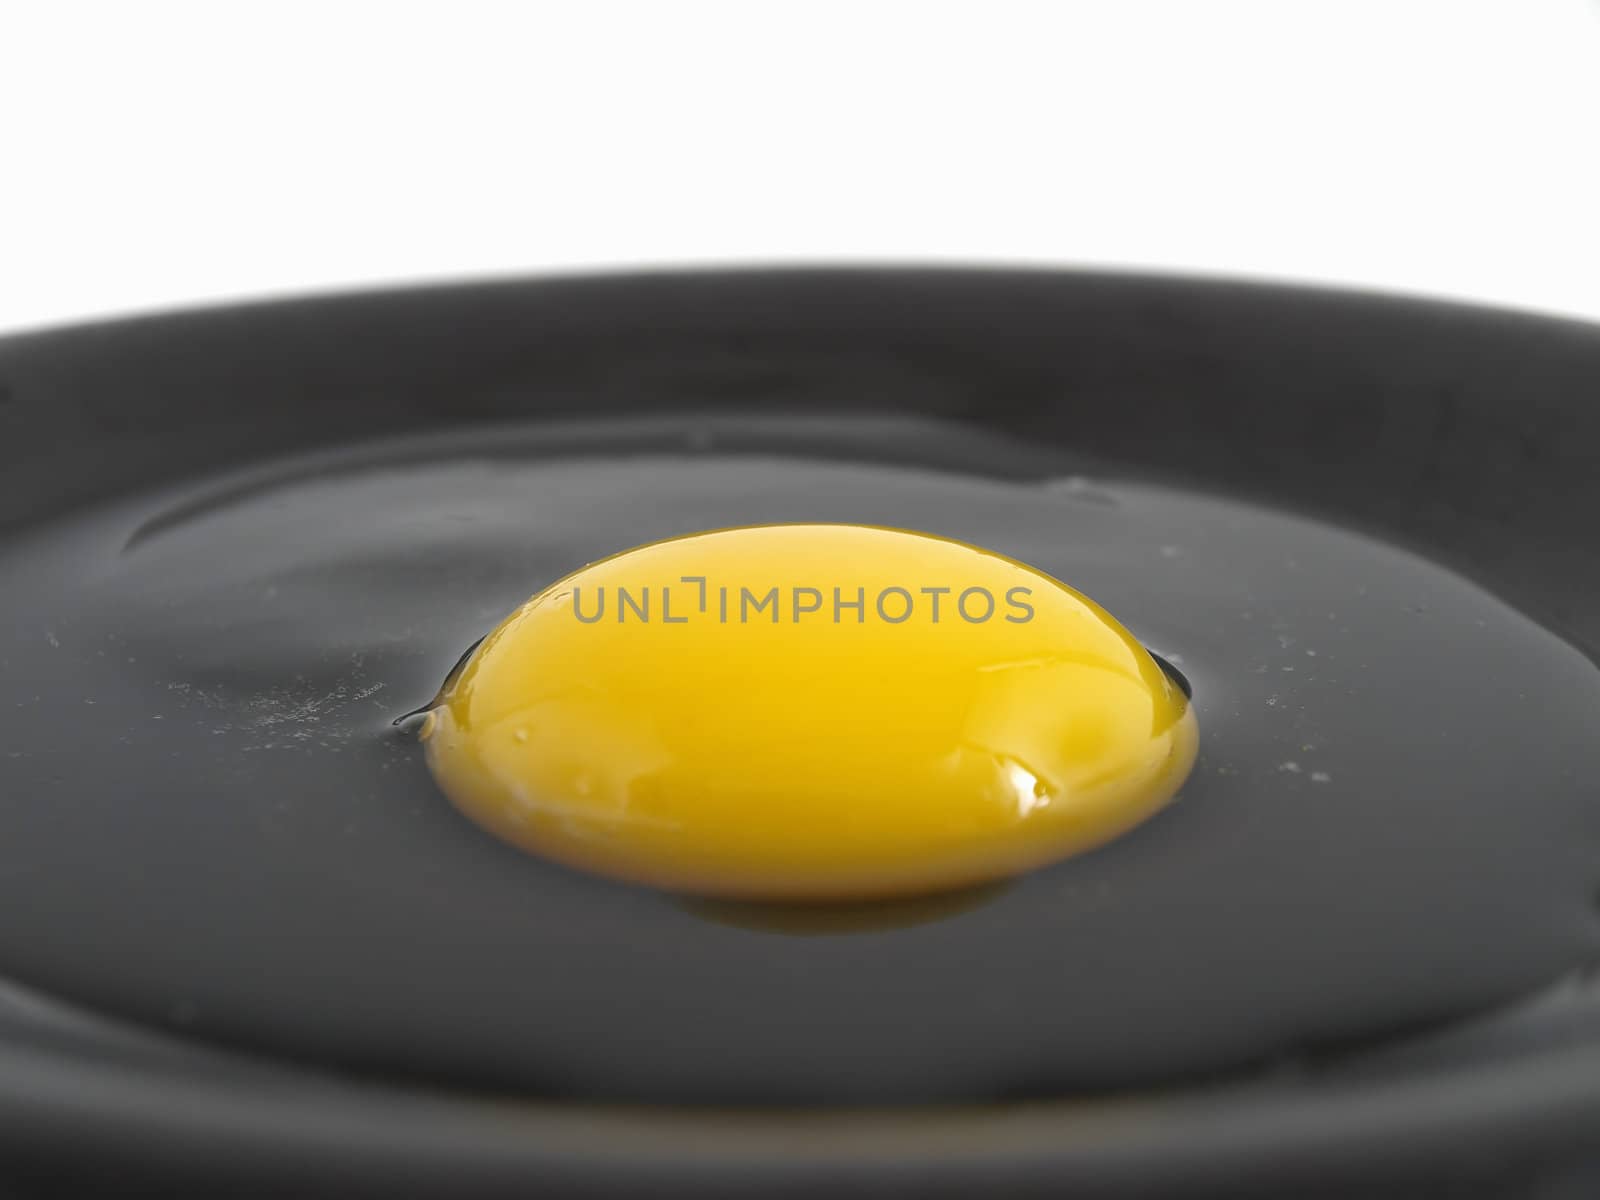 A raw egg cracked on a black plate. Studio isolation.